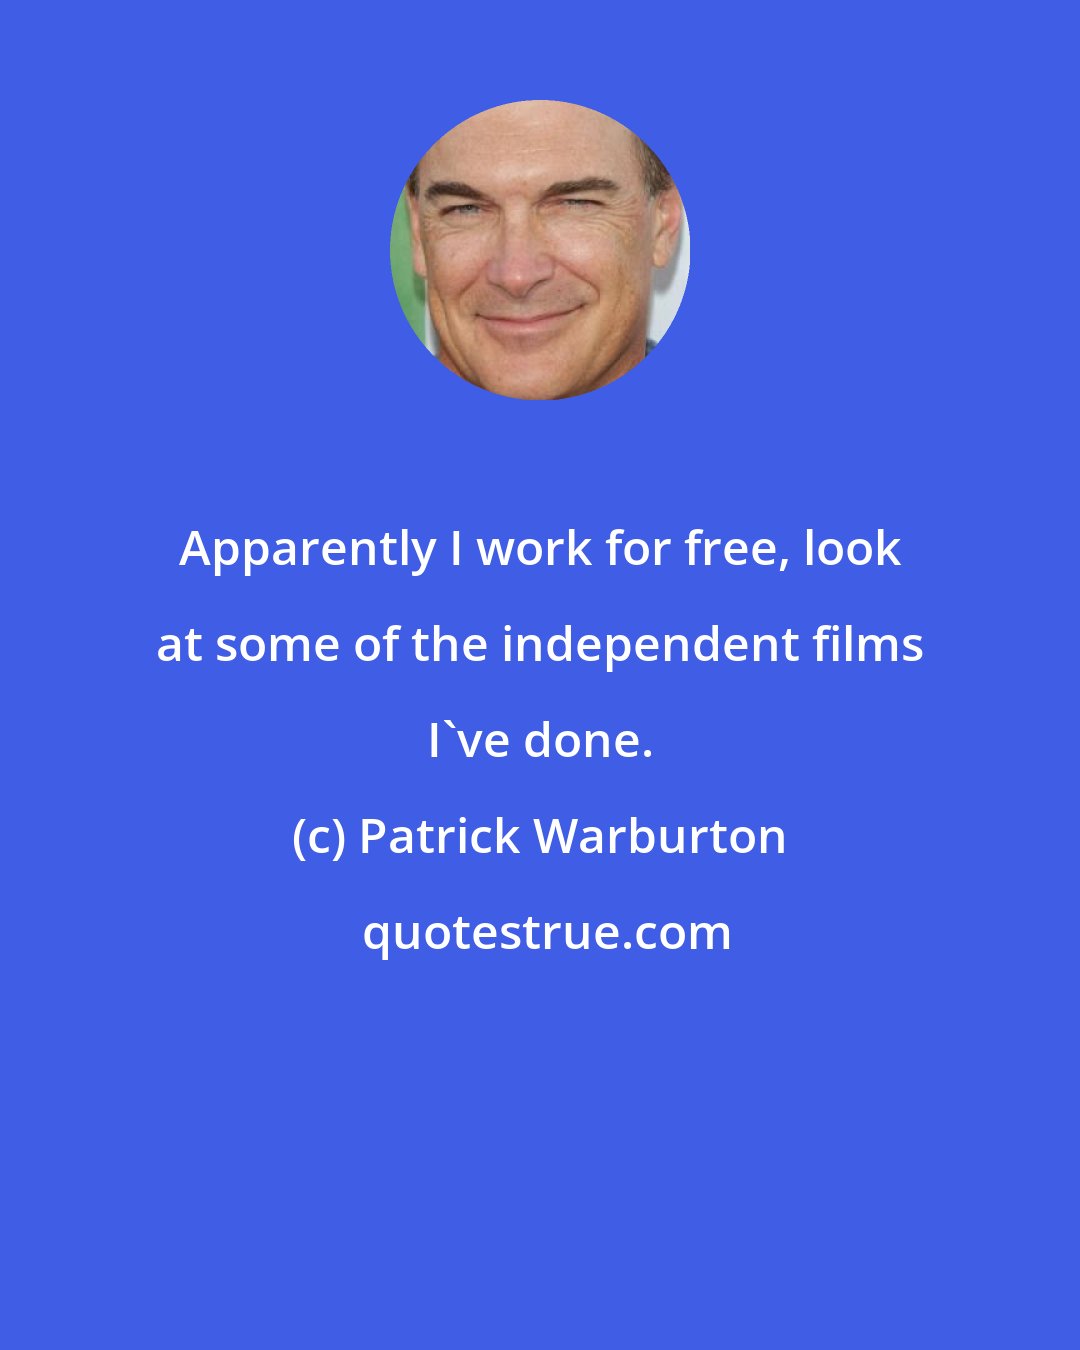 Patrick Warburton: Apparently I work for free, look at some of the independent films I've done.